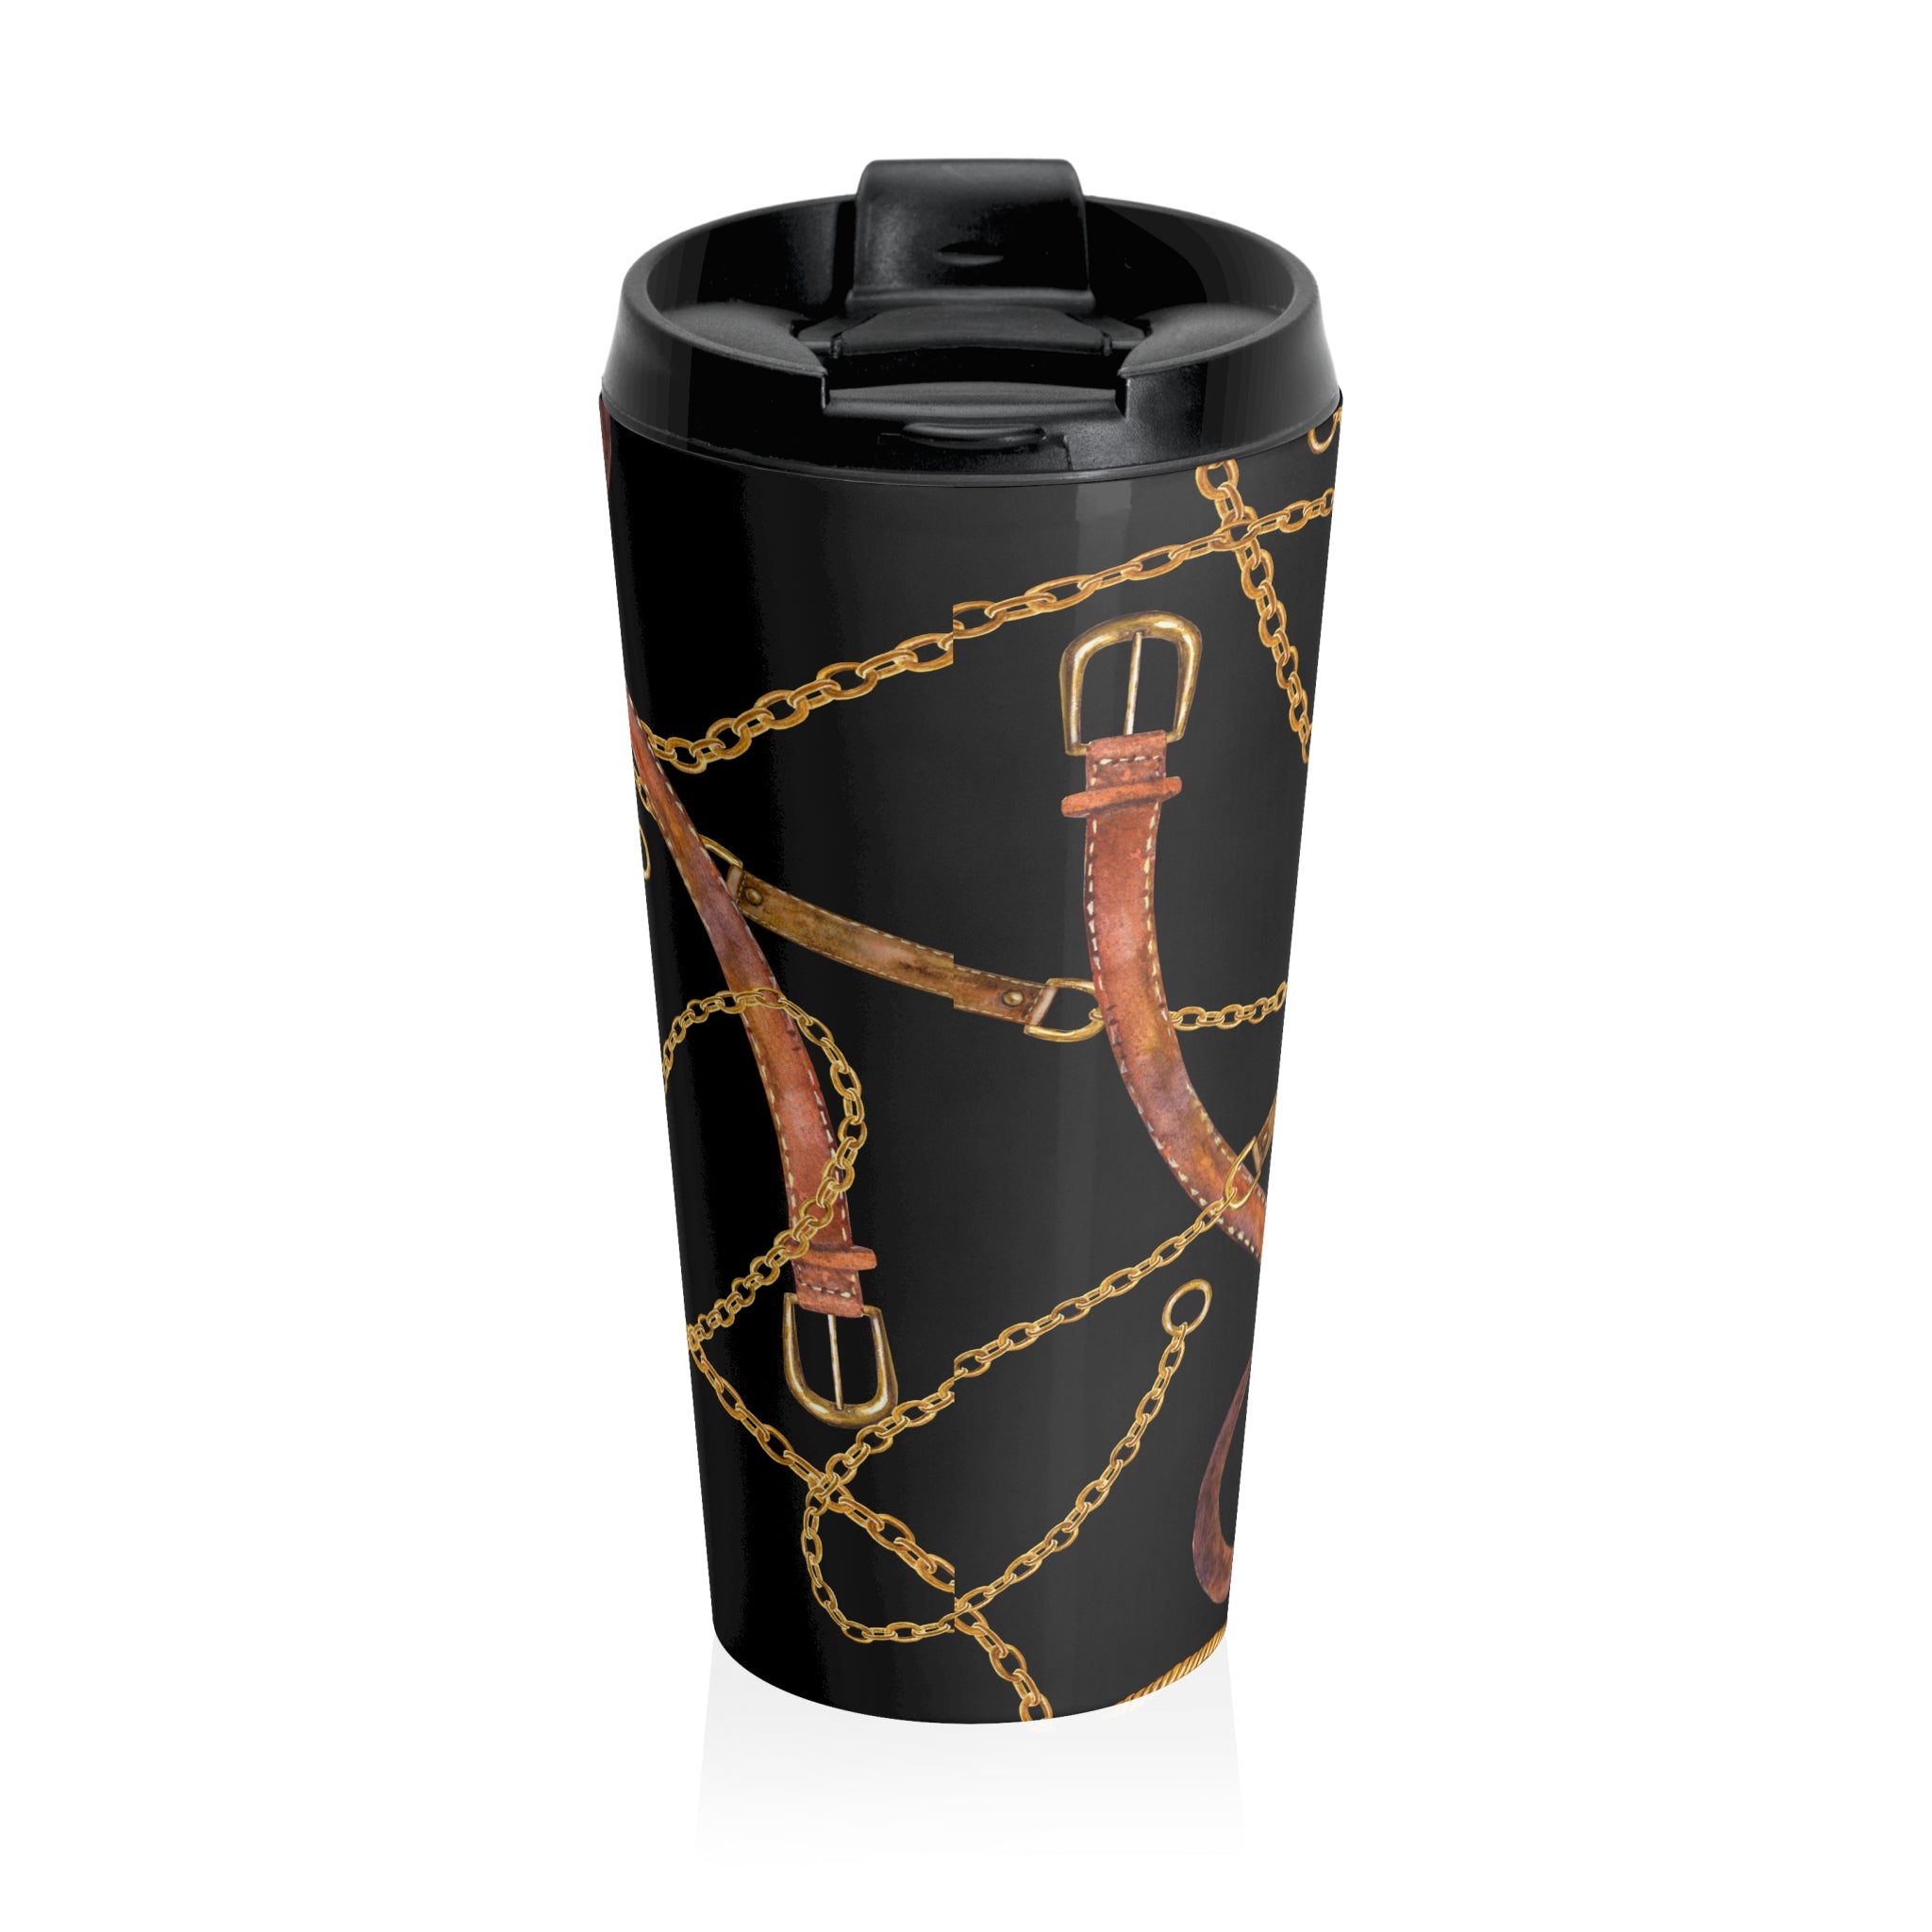  Chains and Leather Black Insulated Stainless Steel Travel Mug, 15oz Patterned Coffee Cup, Cute Travel Mug, Stainless Steel Cup Travel Mug